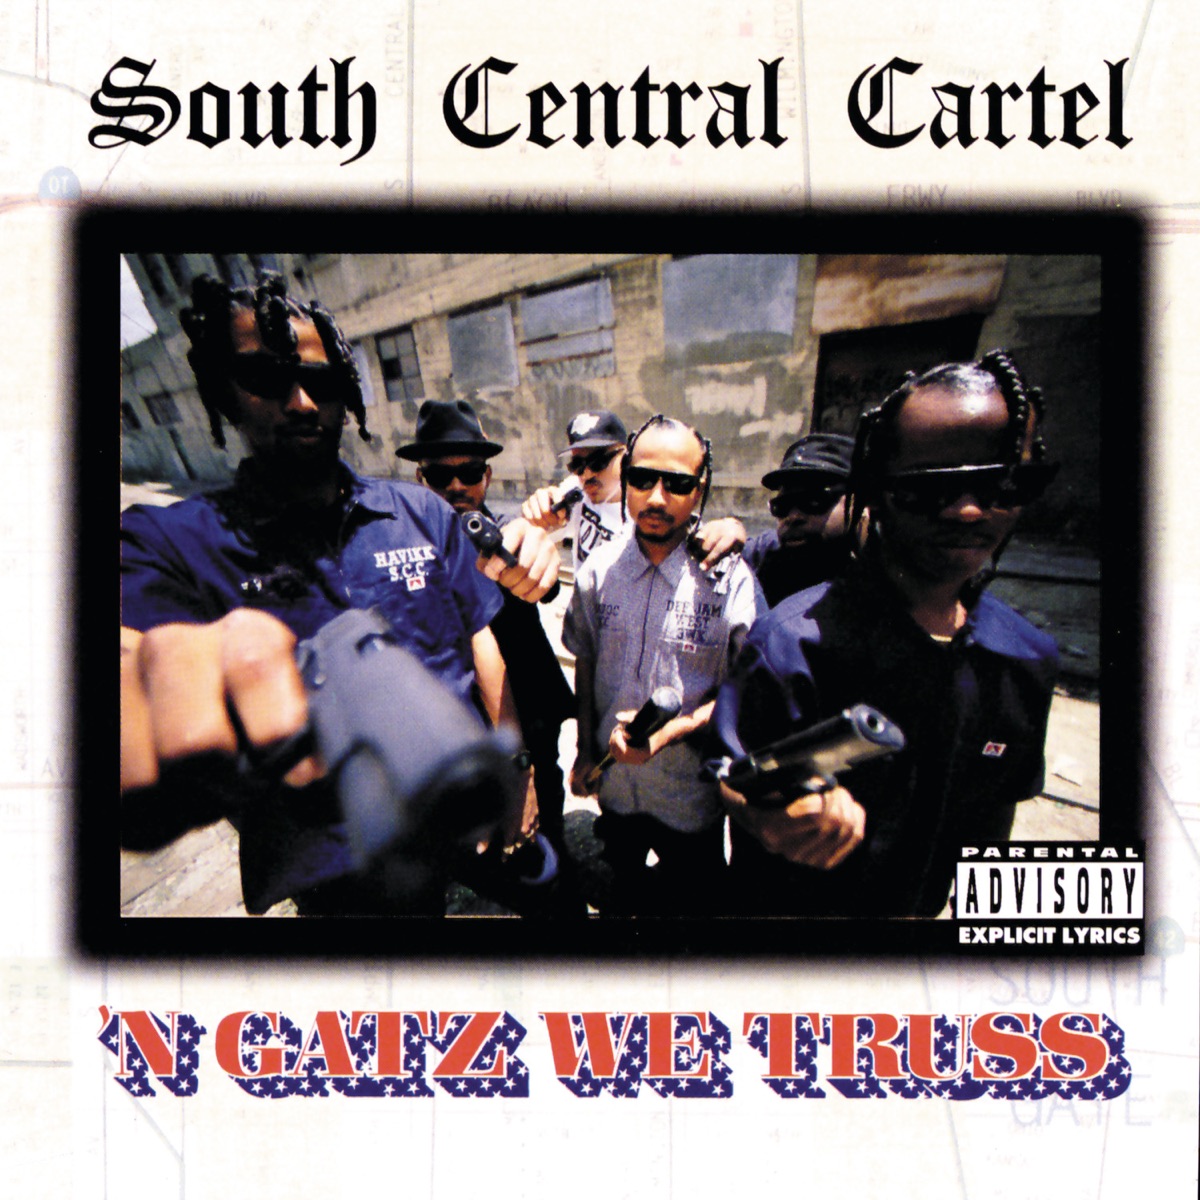 South Central Madness by South Central Cartel on Apple Music